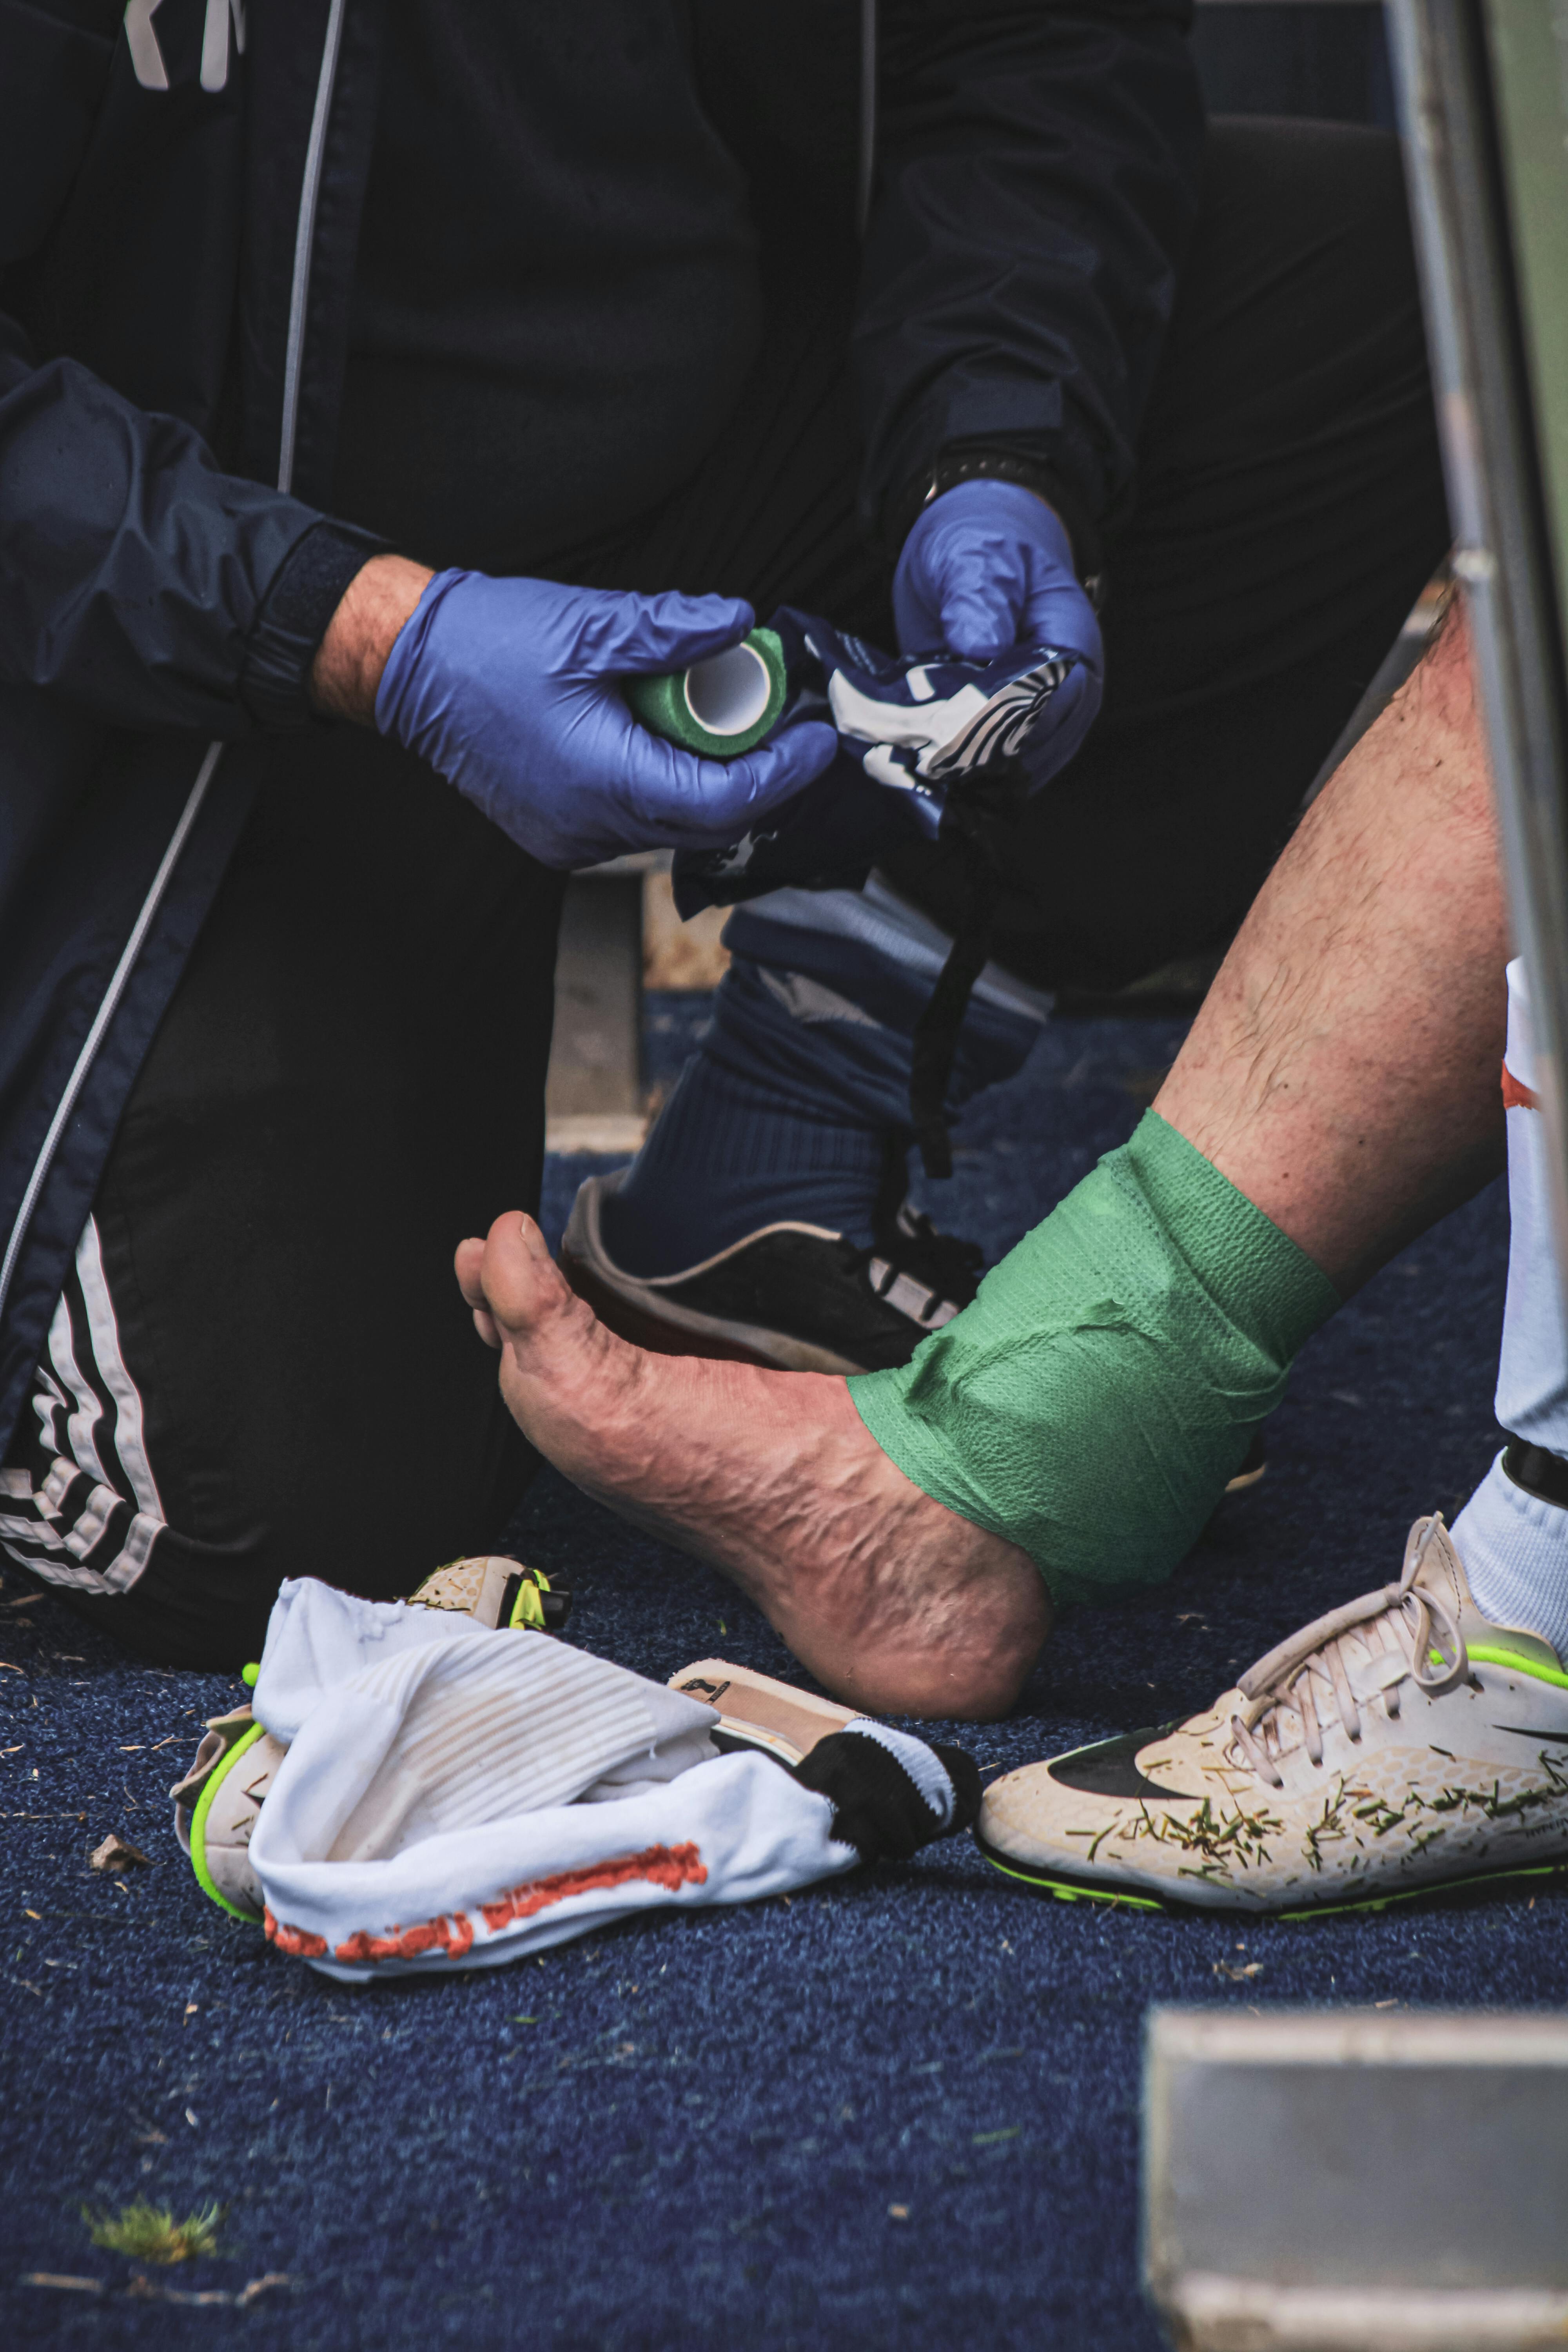 A man helping a player with an injury. | Source: Pexels